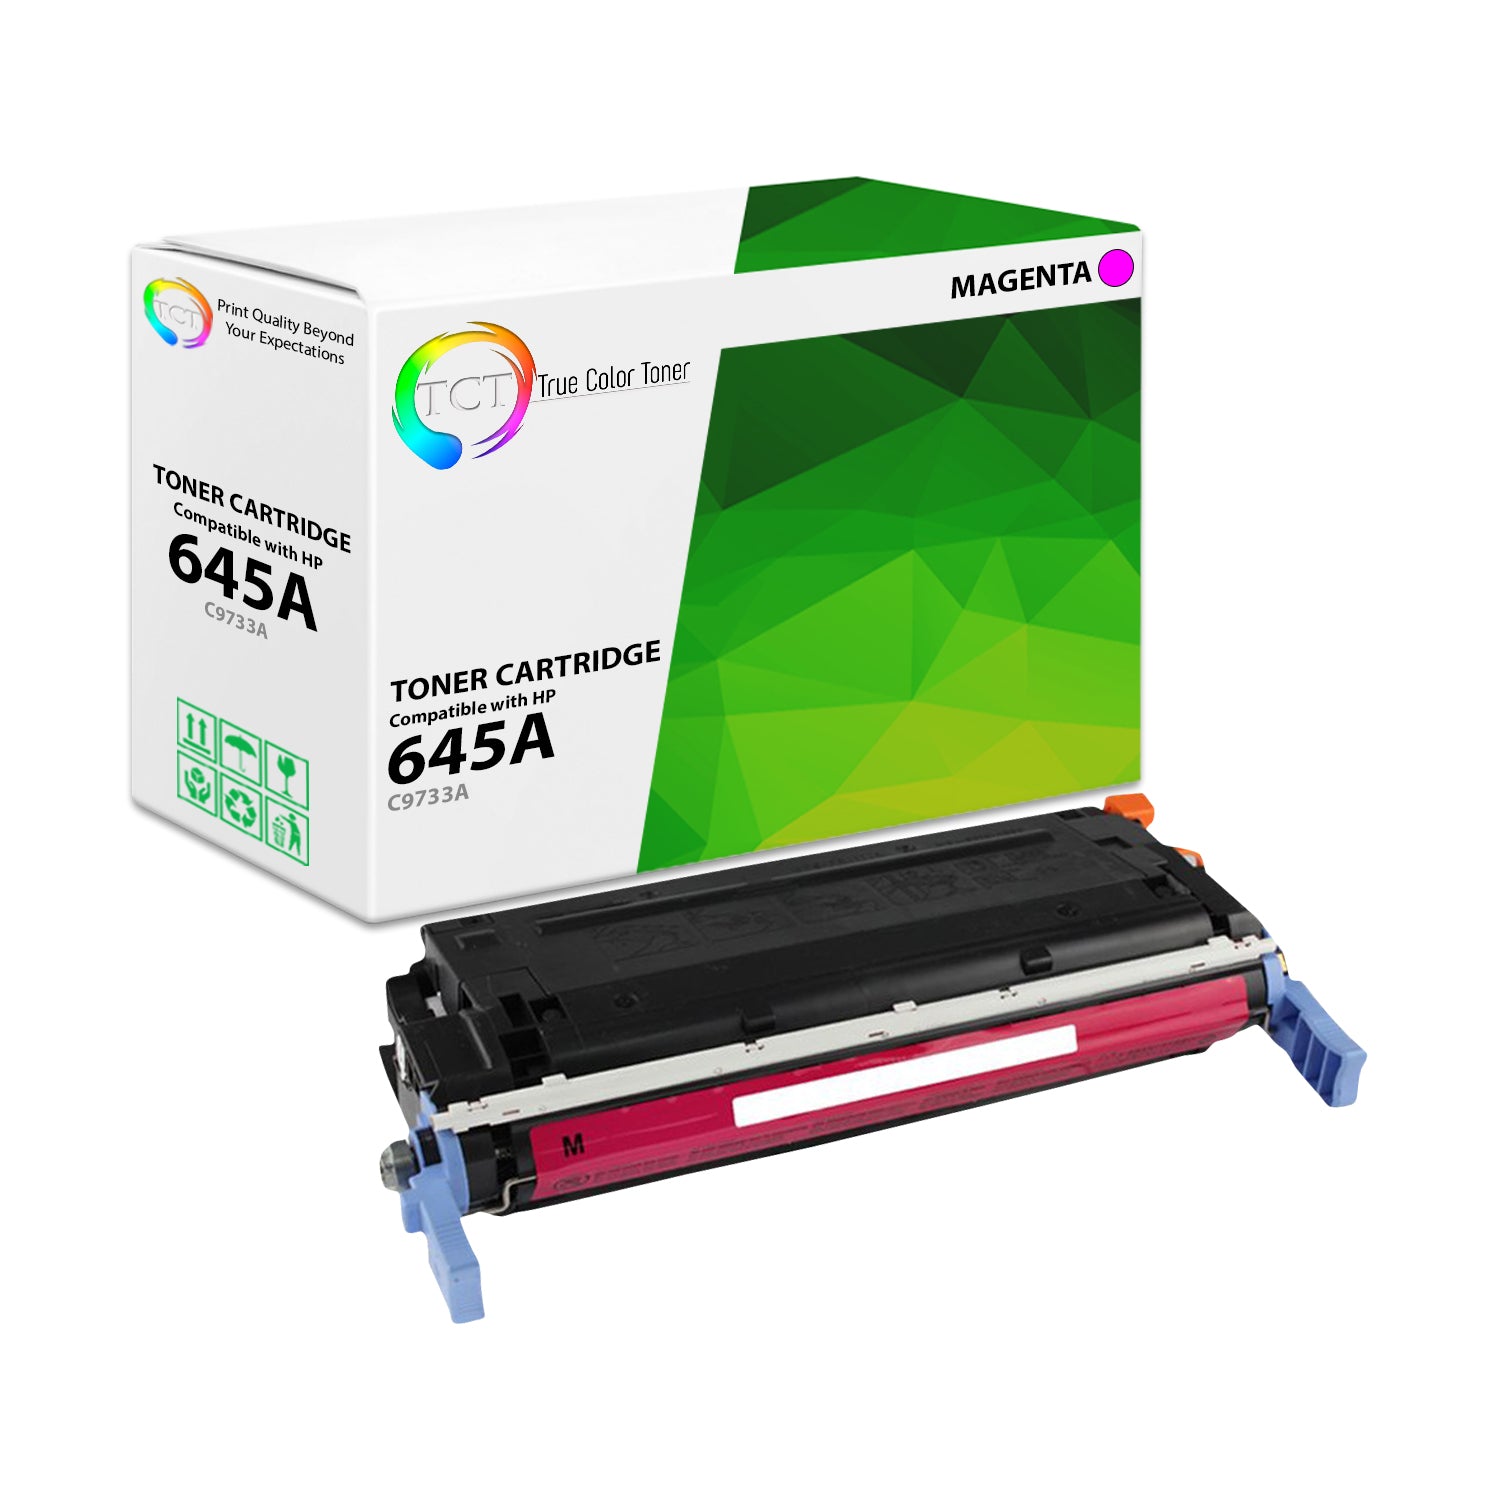 TCT Compatible Toner Cartridge Replacement for the HP 645A Series - 1 Pack Magenta